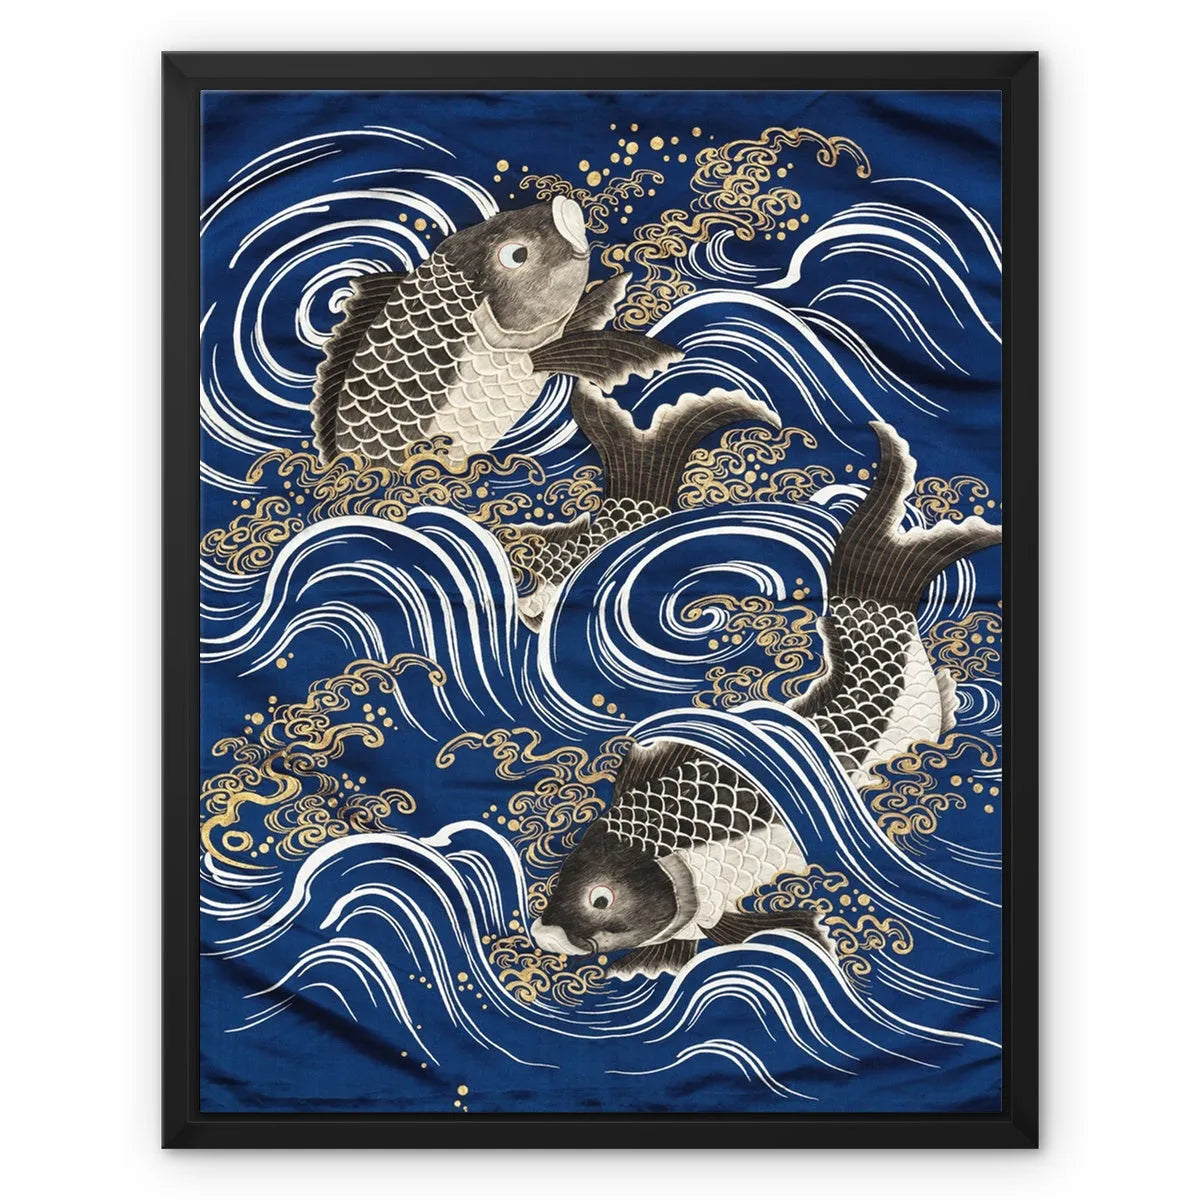 Fukusa And Carp In Waves - Meiji Period Float Frame Canvas - 16’x20’ - Posters Prints & Visual Artwork - Aesthetic Art